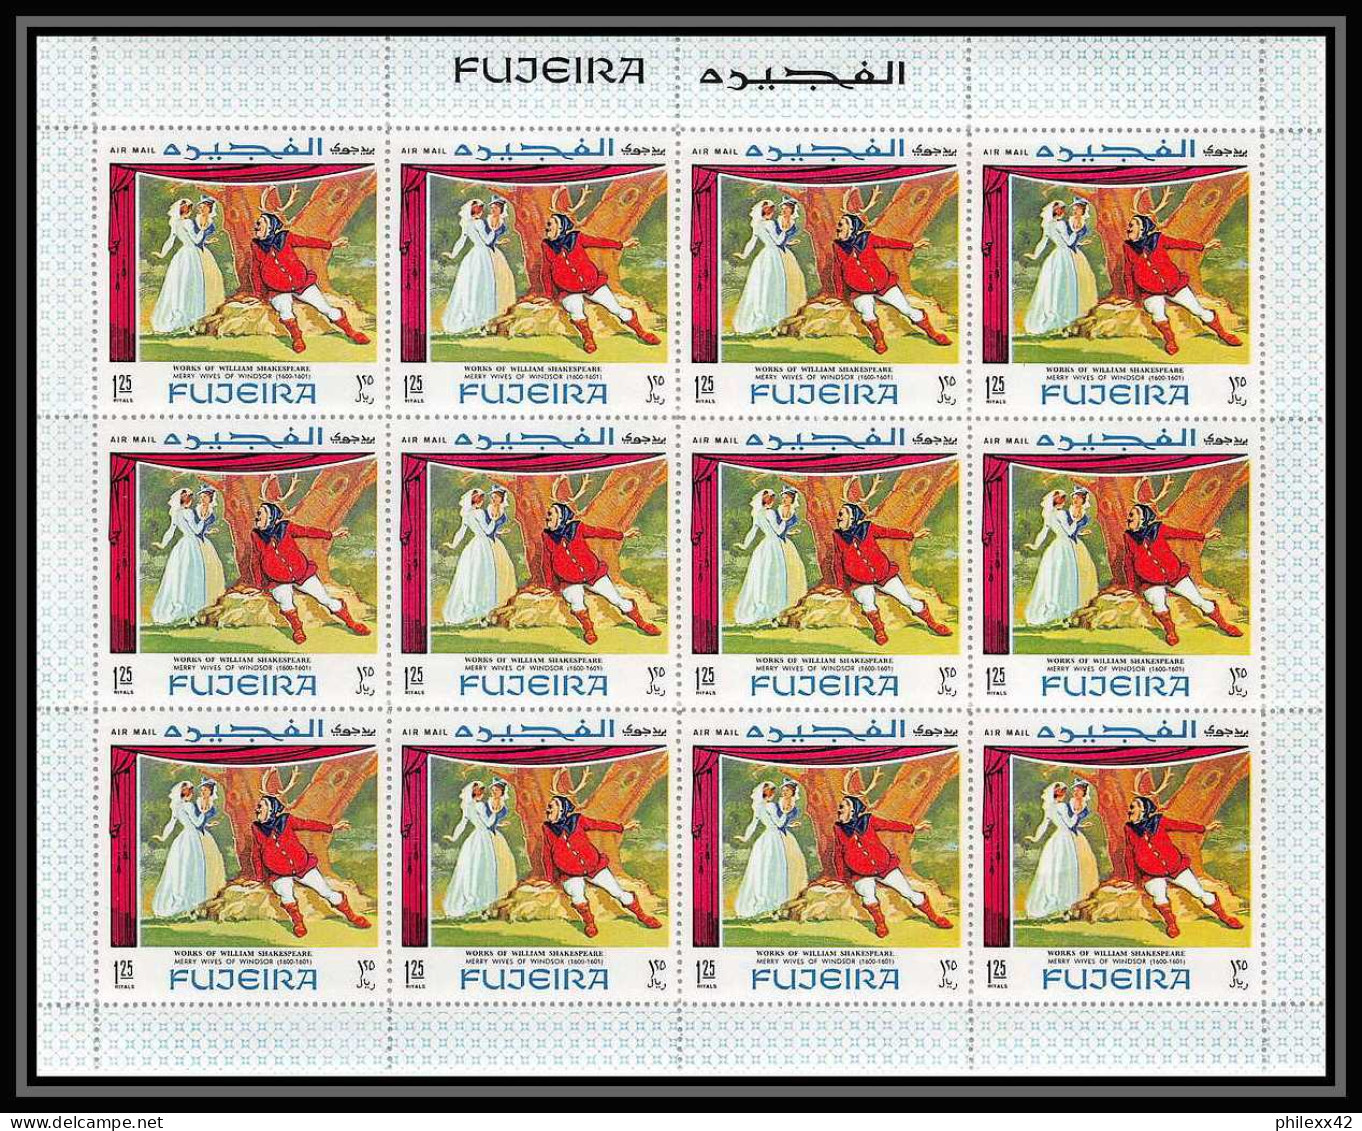 036a - Fujeira mi N°311/319 A scenes from Shakespeare theatre feuille complete (sheet) MNH **